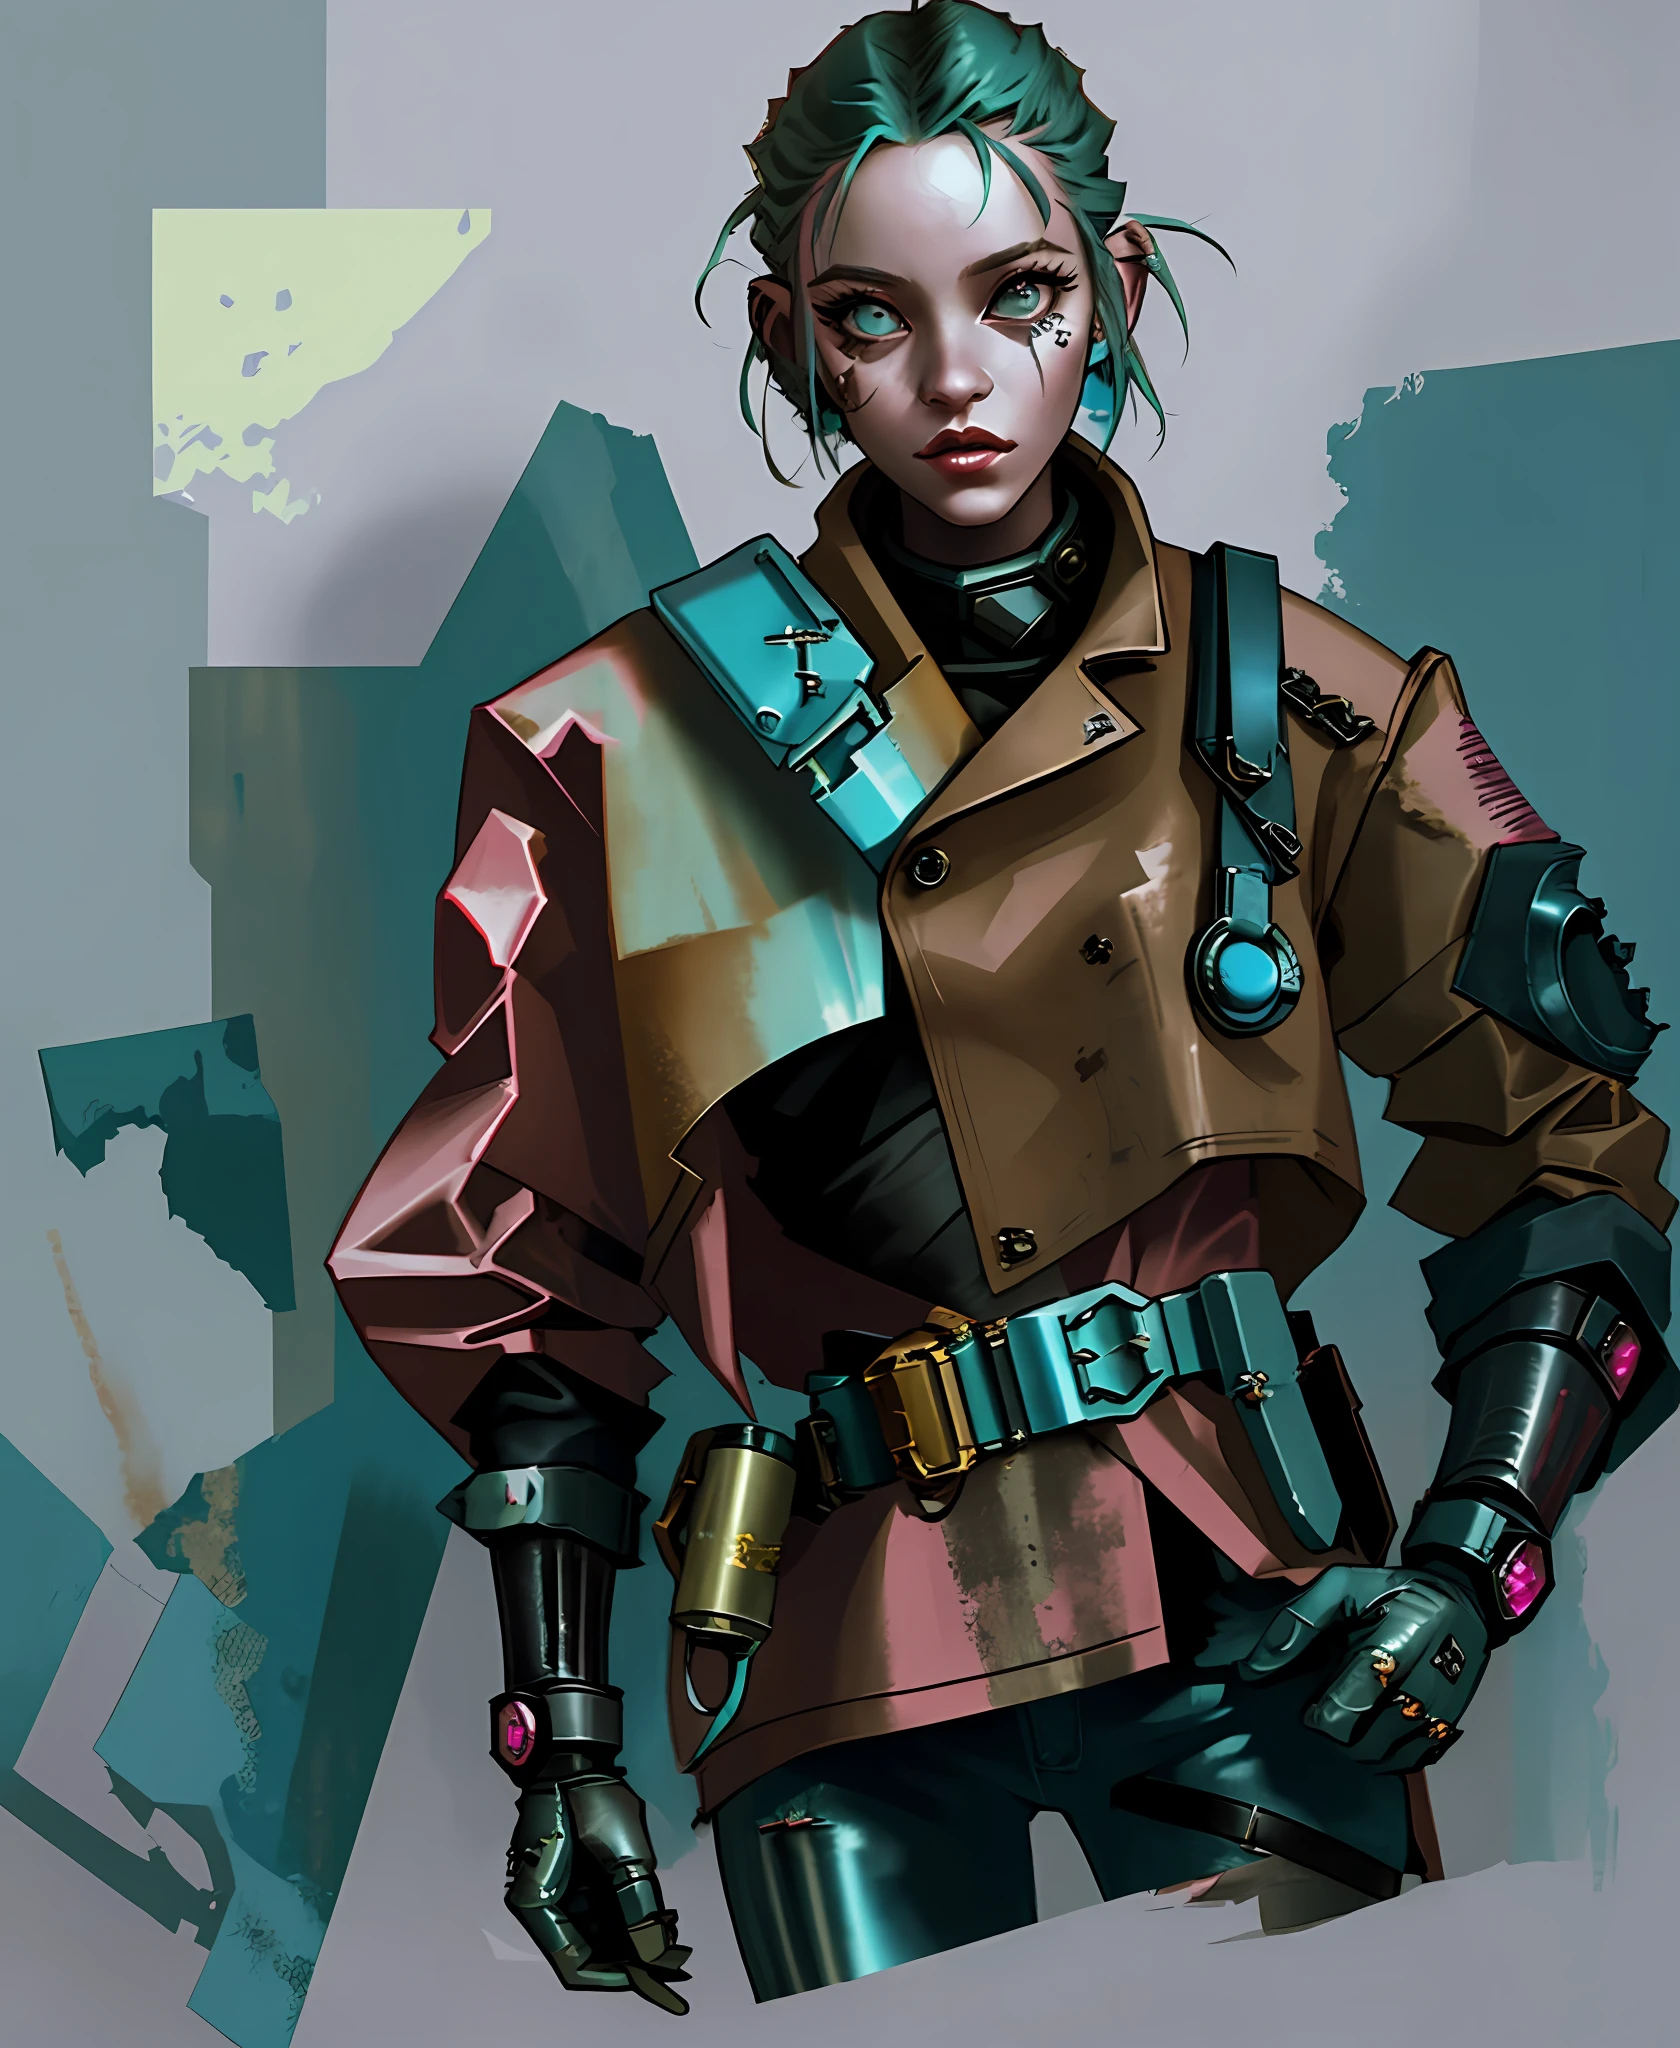 a close up of a woman in a military outfit holding a sword, post - apocalyptic cowgirl, postapocalyptic vibes, postapocalyptic style, post apocalyptic attire, wearing apocalyptic clothes, set in post apocalyptic tokyo, diesel punk female, cyberpunk 2 0 y. o model girl, very beautiful cyberpunk samurai, post - apocalyptic scavenger, postapocalyptic explorer, (((wasteland punk style))), inspired on Mad Max movies, 8k,16k,4k,uhd,((masterpiece)), desert un the background